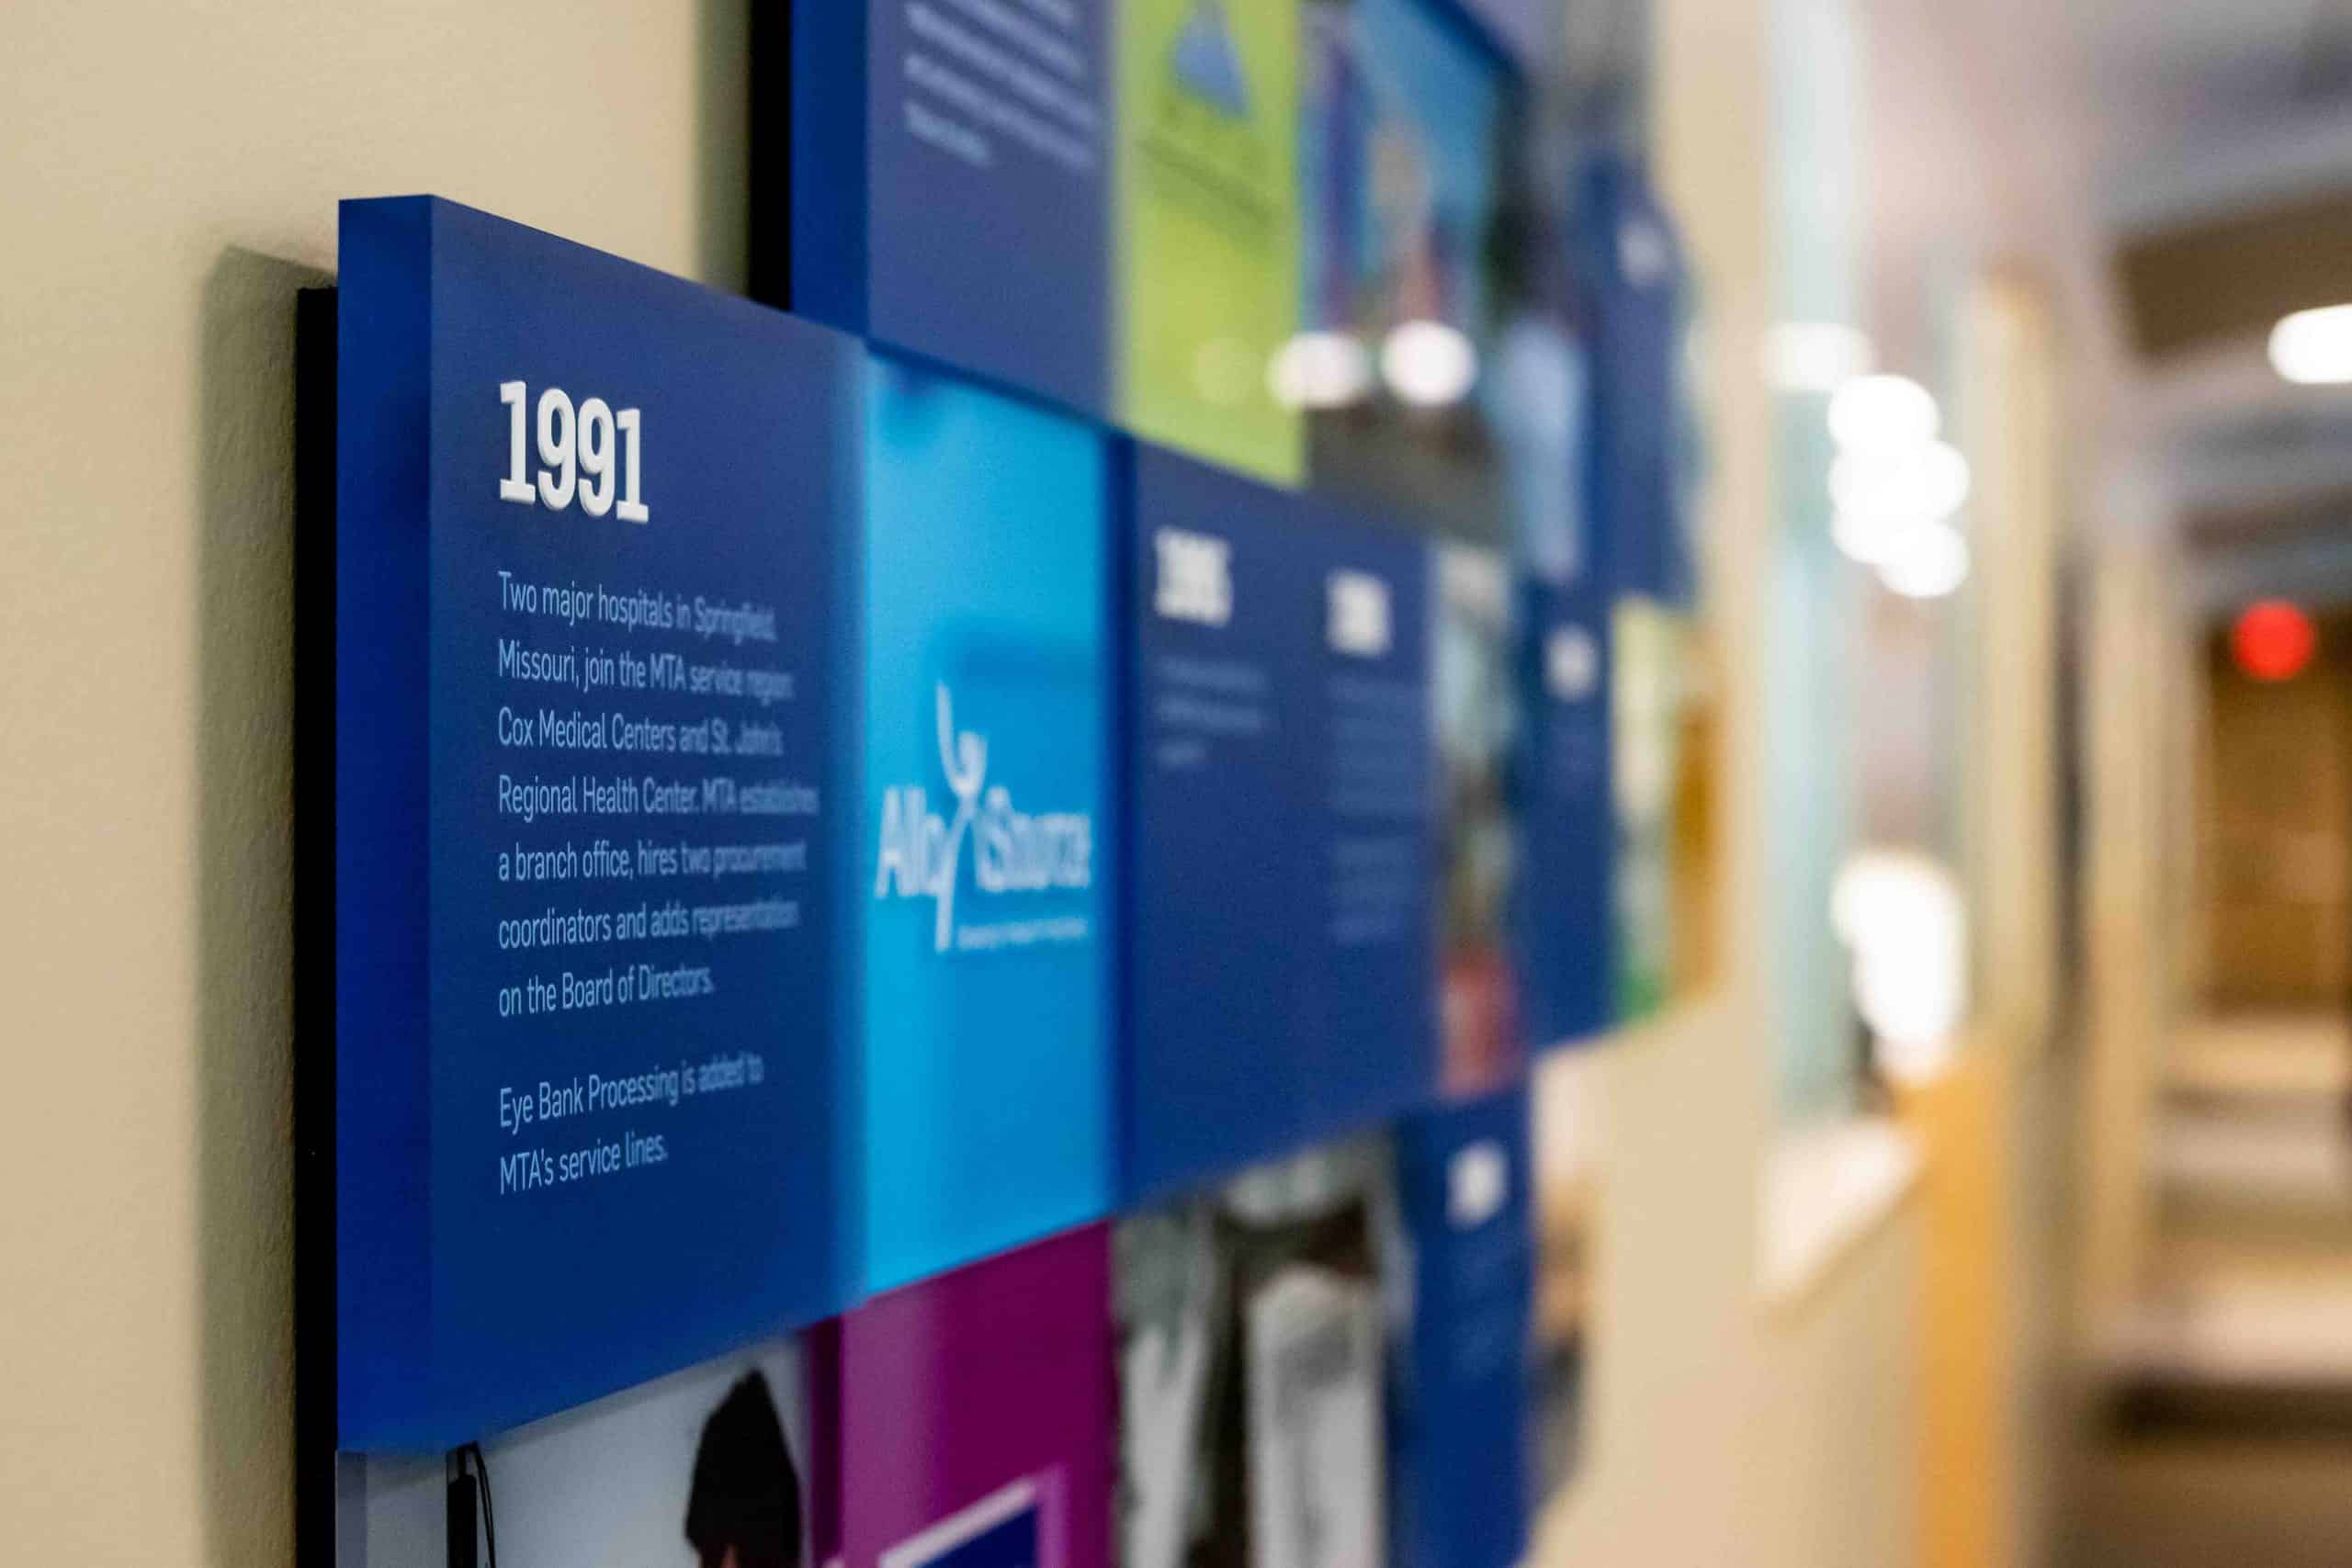 up close detail image of multidimensional timeline display for Mid-America Transplant office building